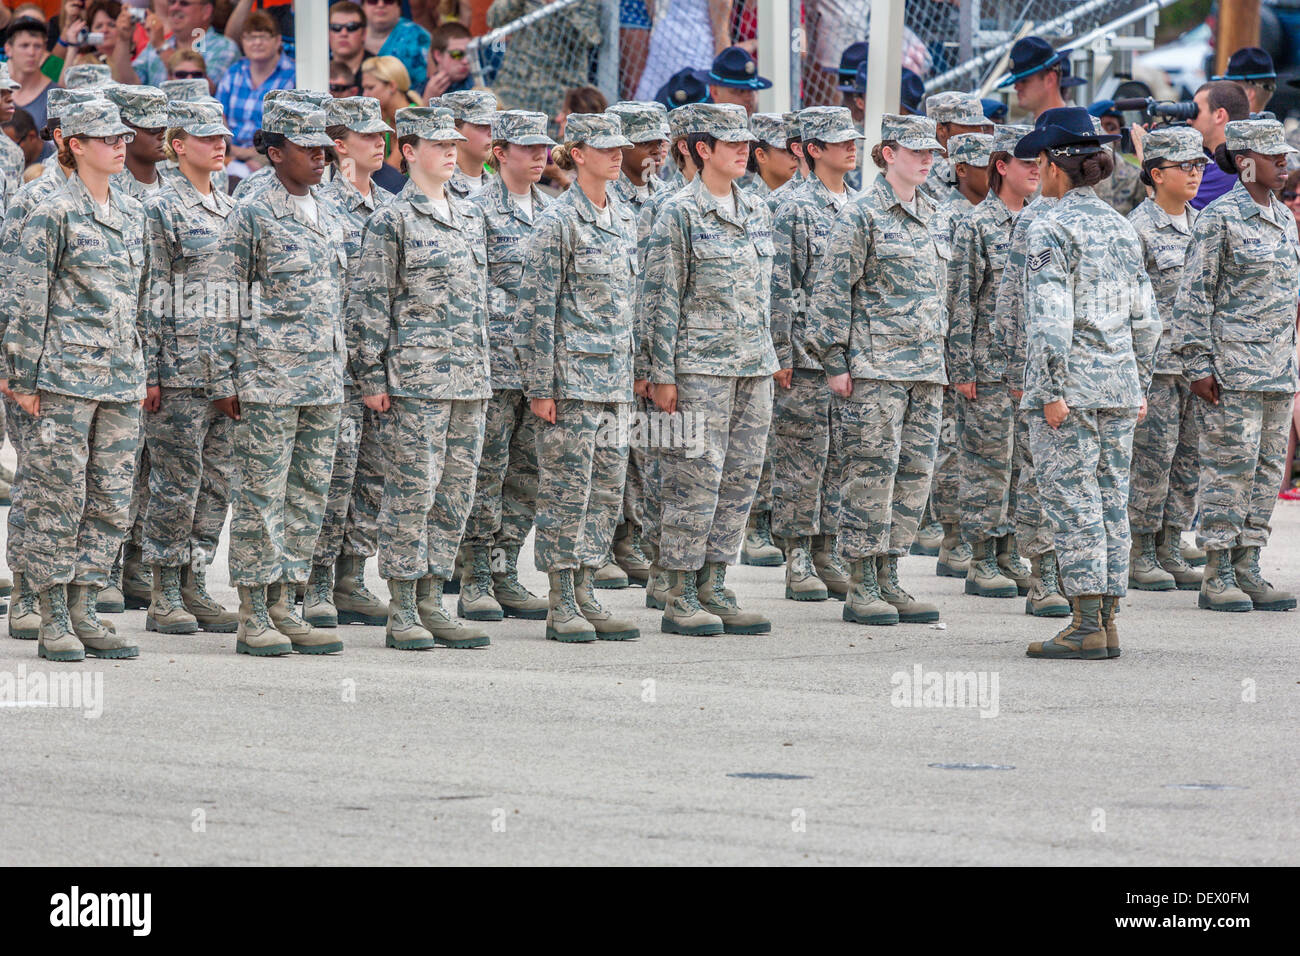 Flight of female airmen at attention in formation during United States Air Force basic training graduation ceremonies Stock Photo